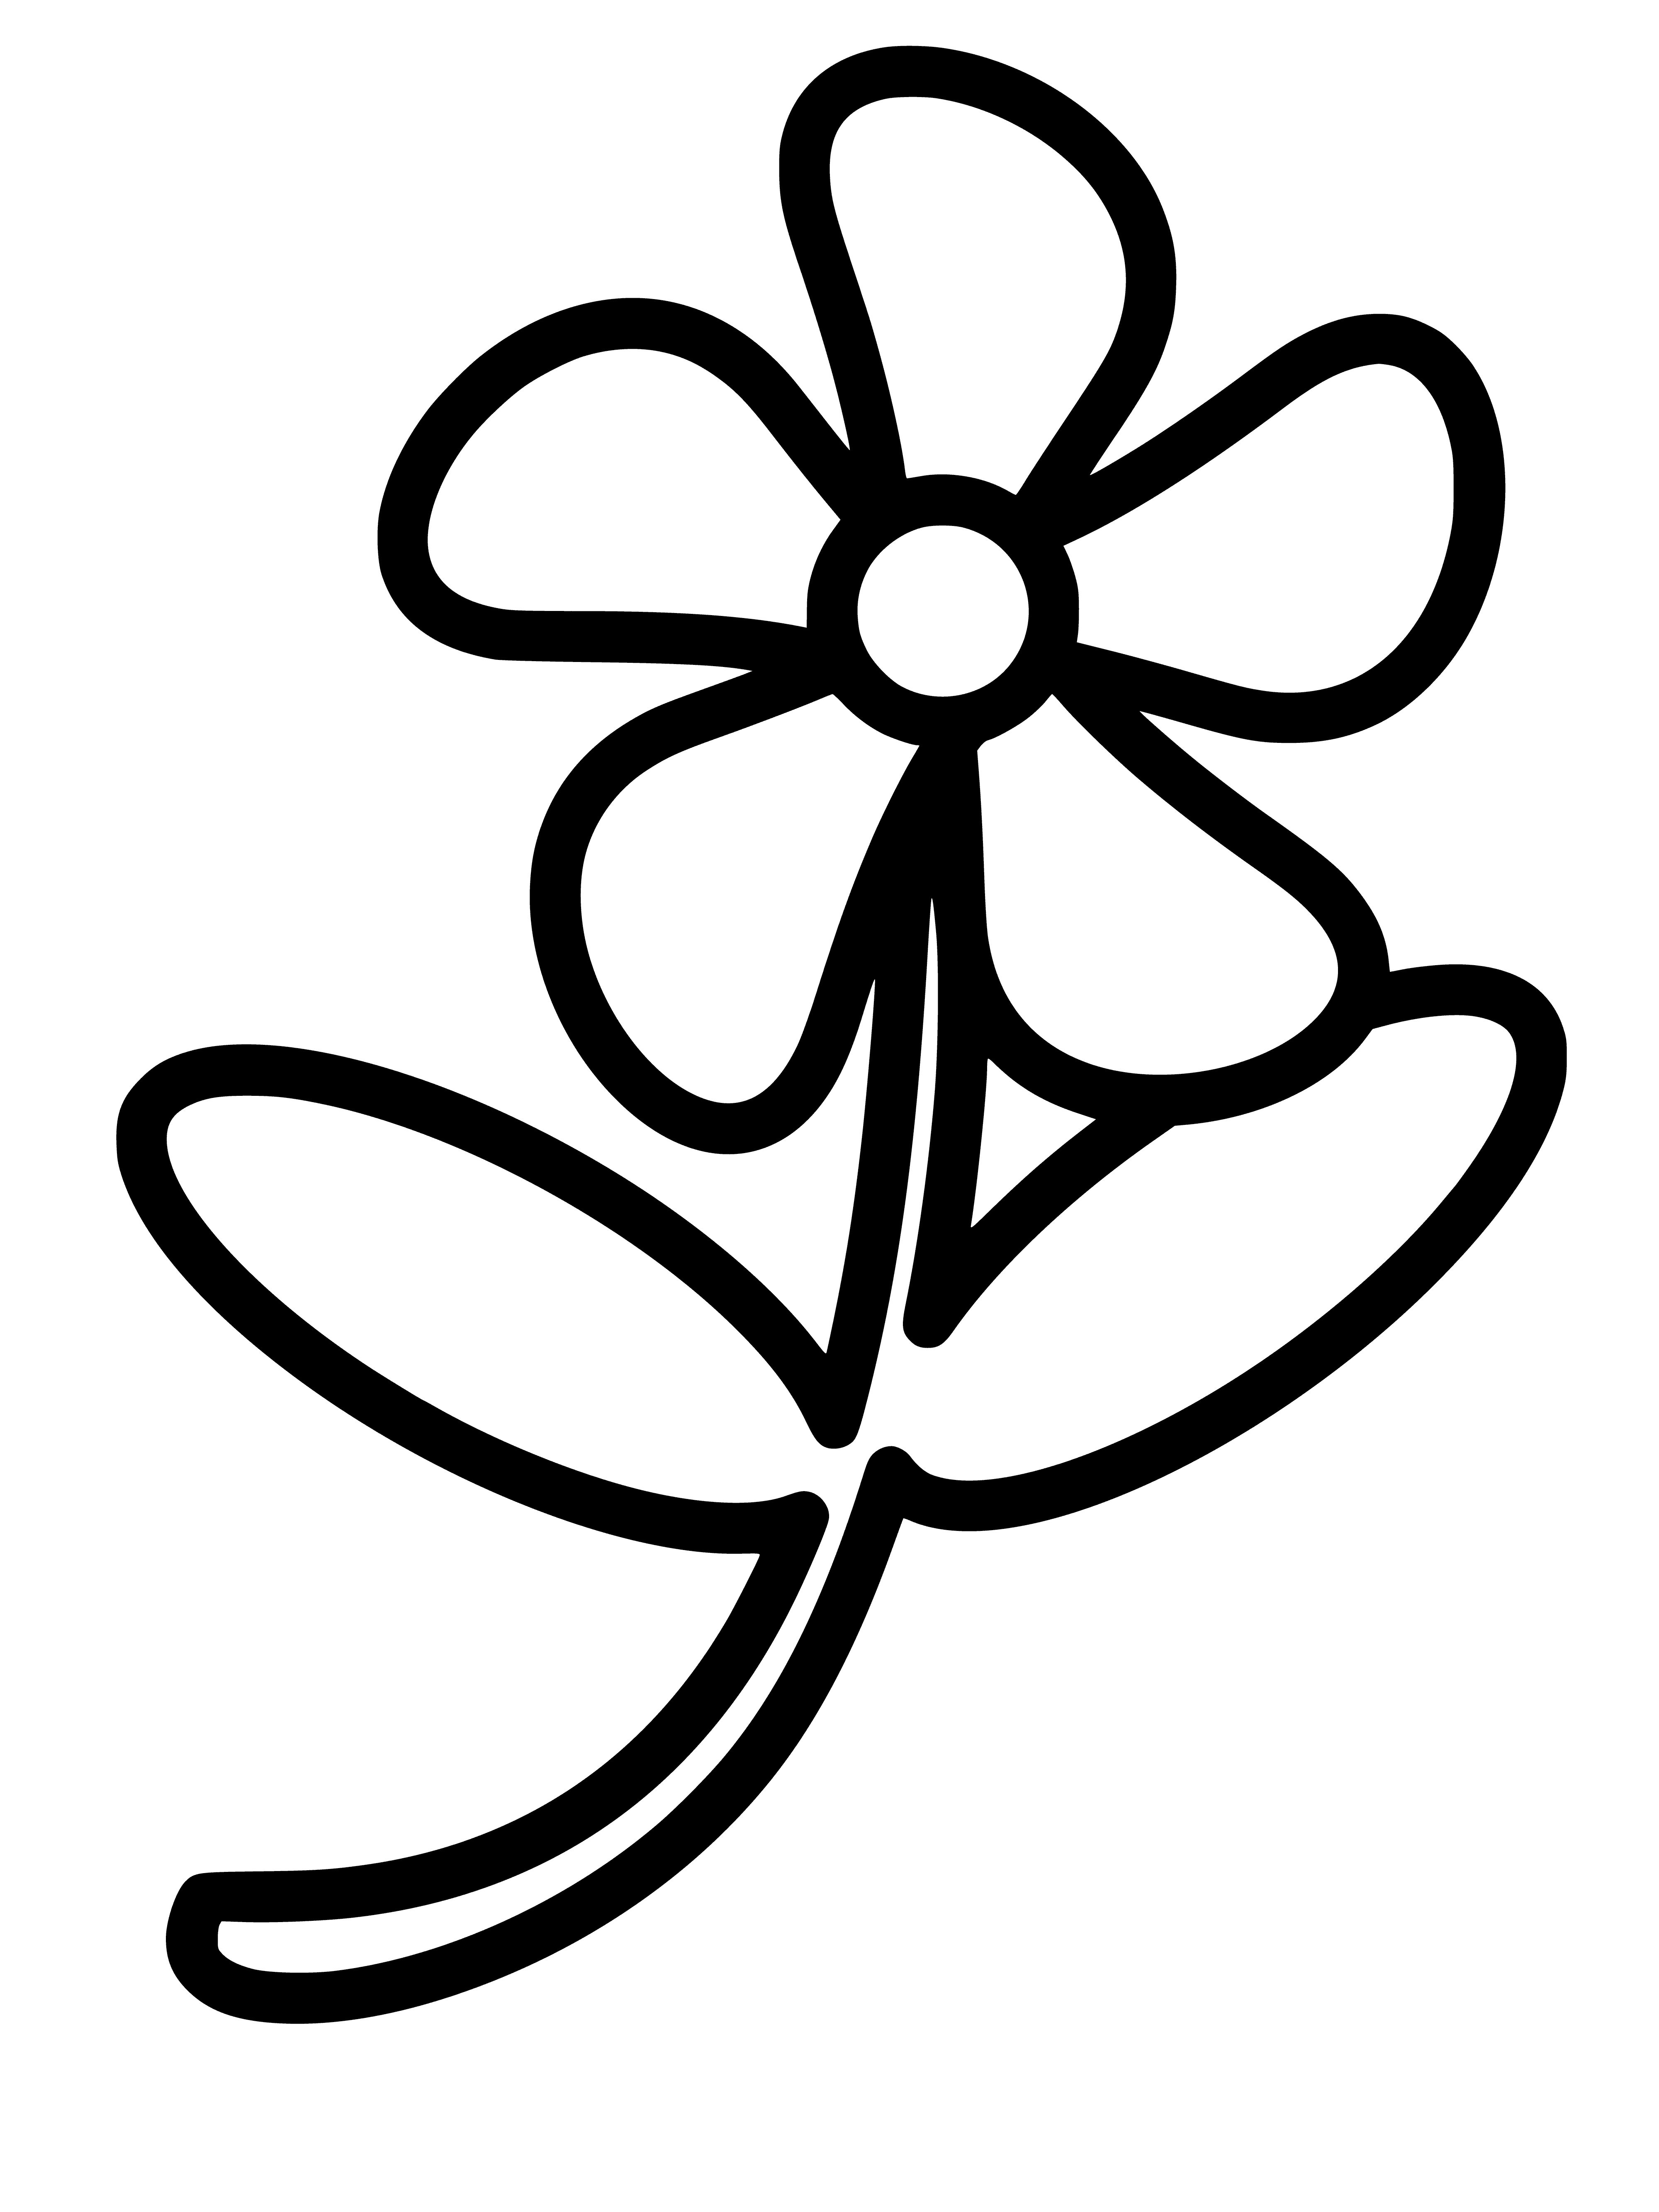 coloring page: A flower is a colorful, fragrant part of a plant composed of ovary, stigma, style, filament, anther and petals.